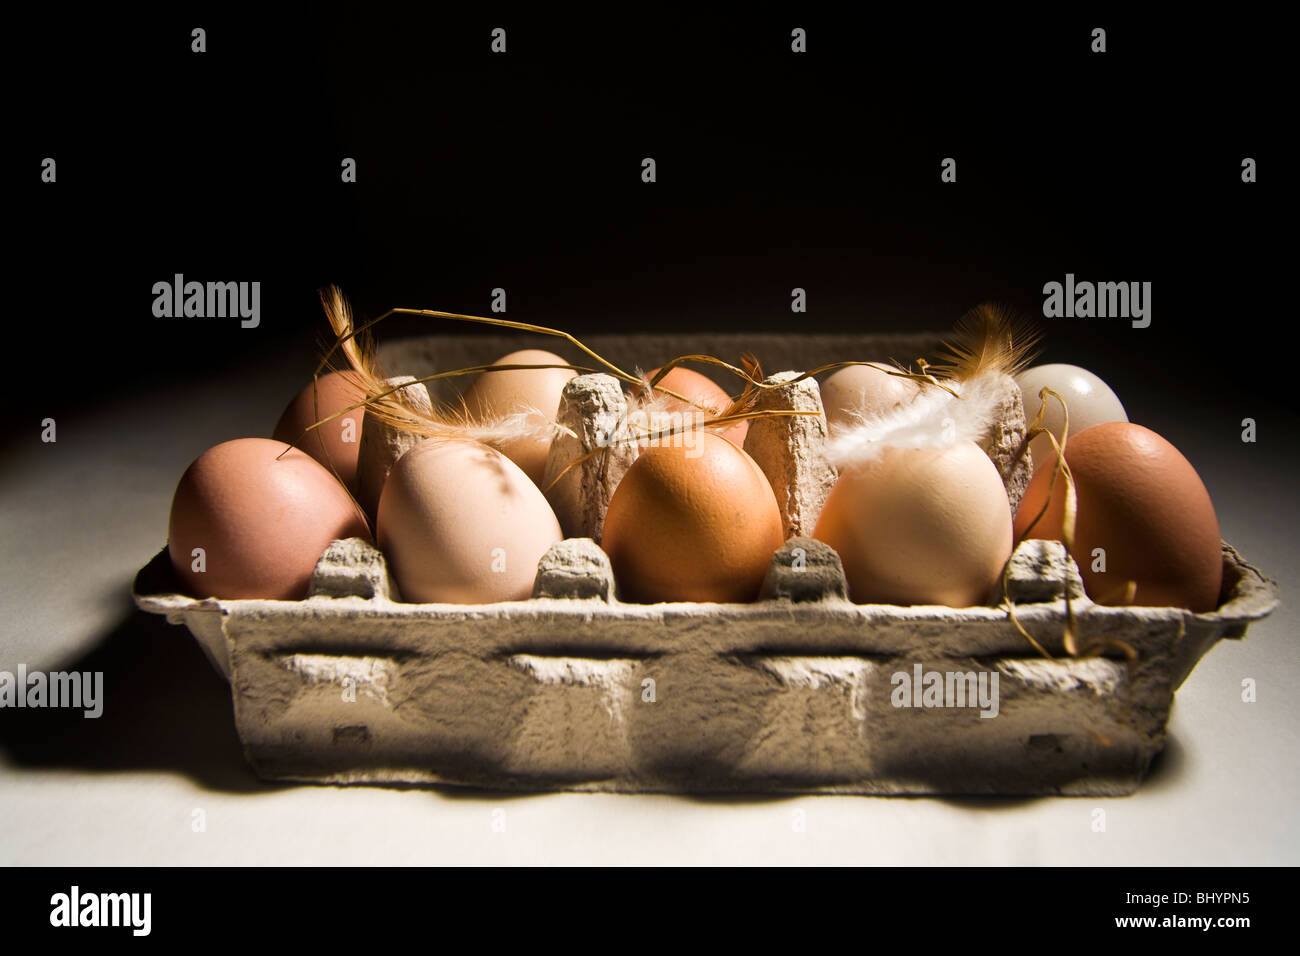 eggs in a packing Stock Photo